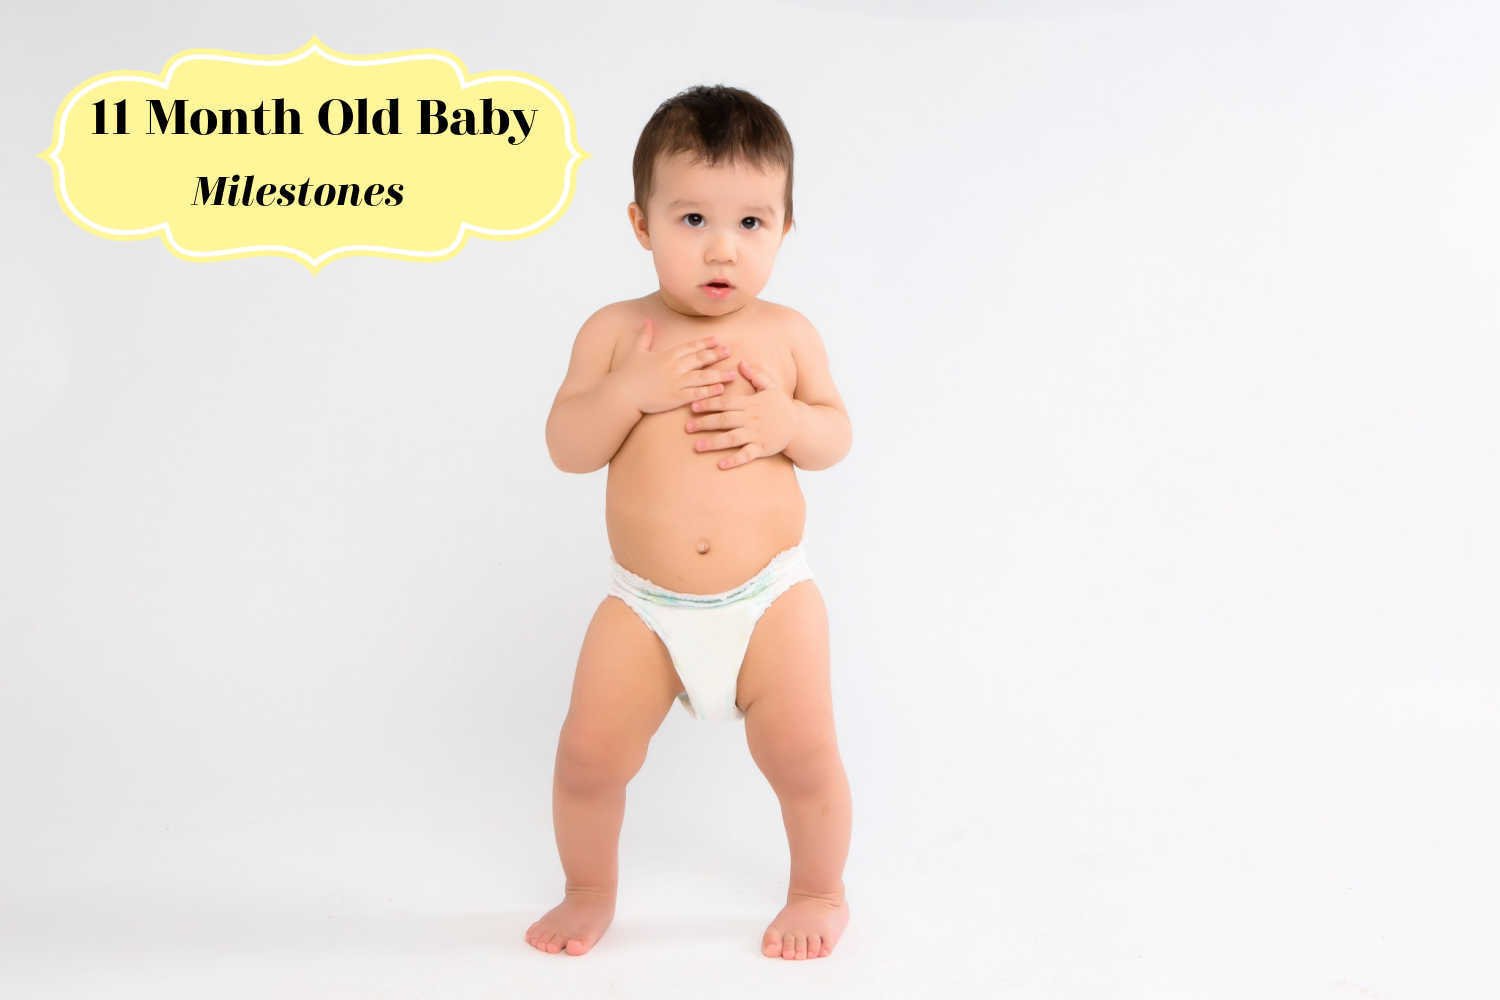 11 Month Old Baby Milestones – What Are They and How to Help Your Baby